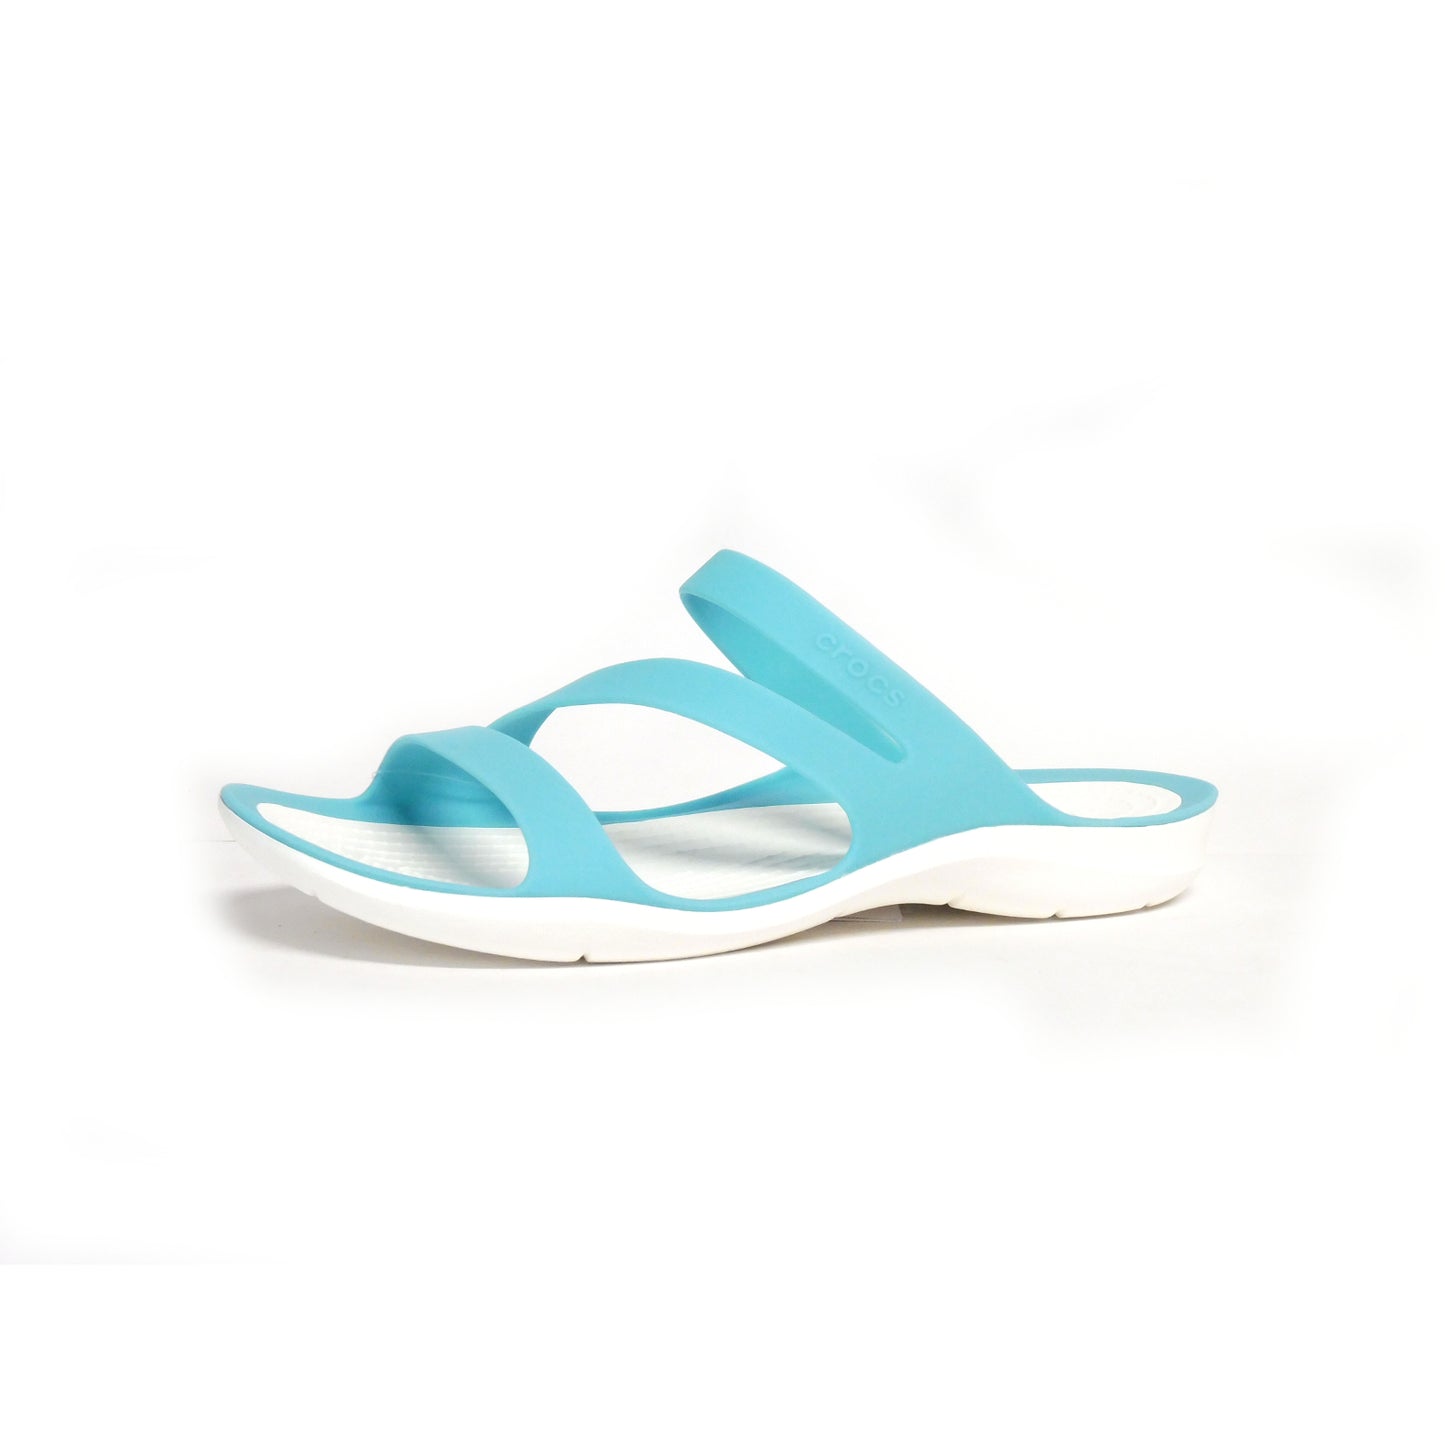 Swiftwater Sandal Pool/White (size US 5) - ONLINE ONLY